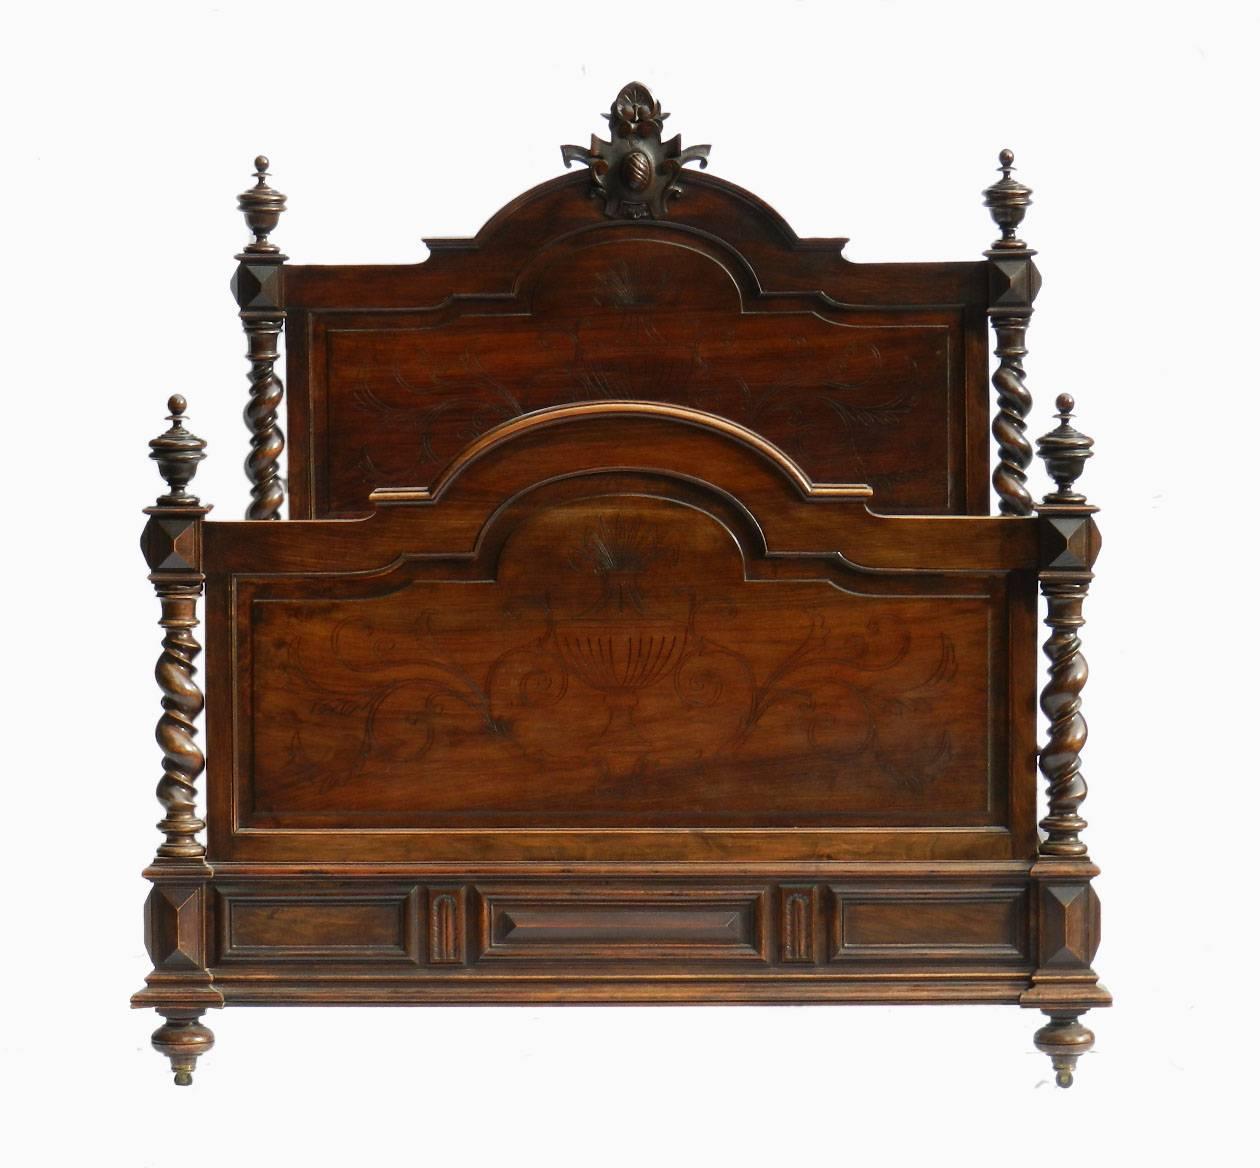 Superb C19 Louis French chateau bed
Solid Carved Walnut
This bed will take a 5ft wide (60 in) UK king size or American US Queen size base and mattress
If you need more info or advice regarding base and mattress please do ask we can supply if